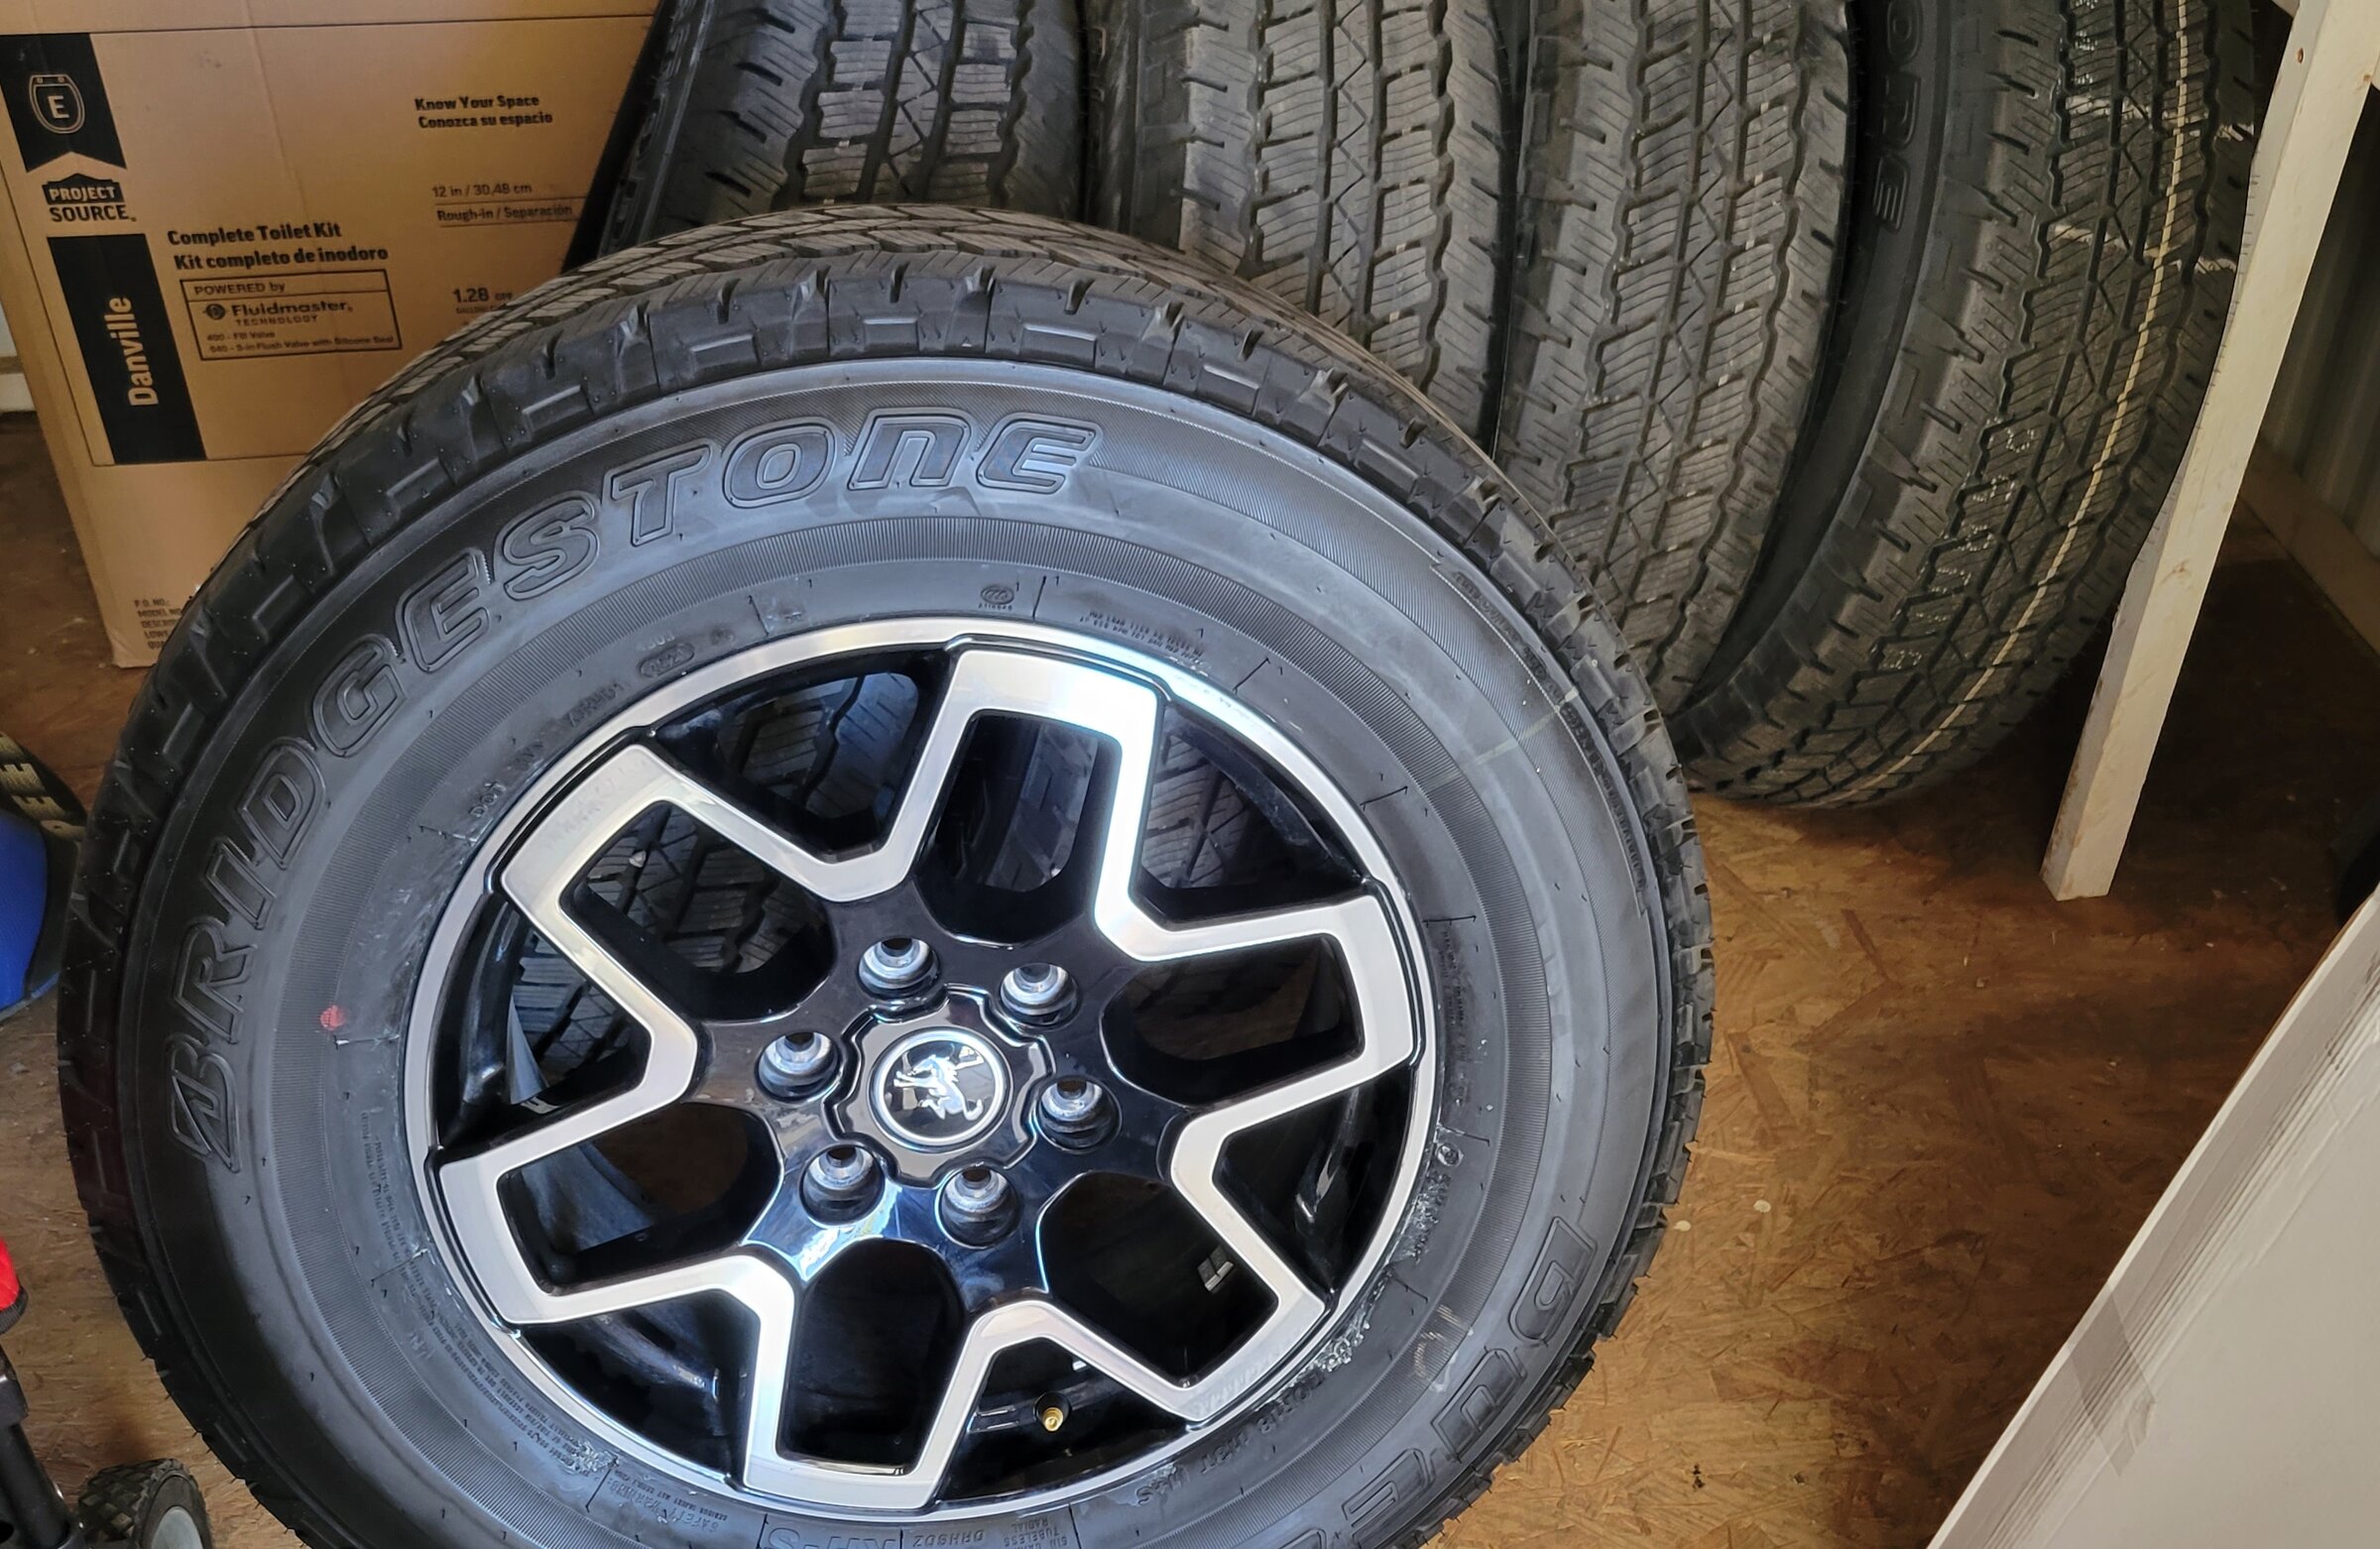 Ford Bronco Arizona Parts for Sale & Trade obx wheels